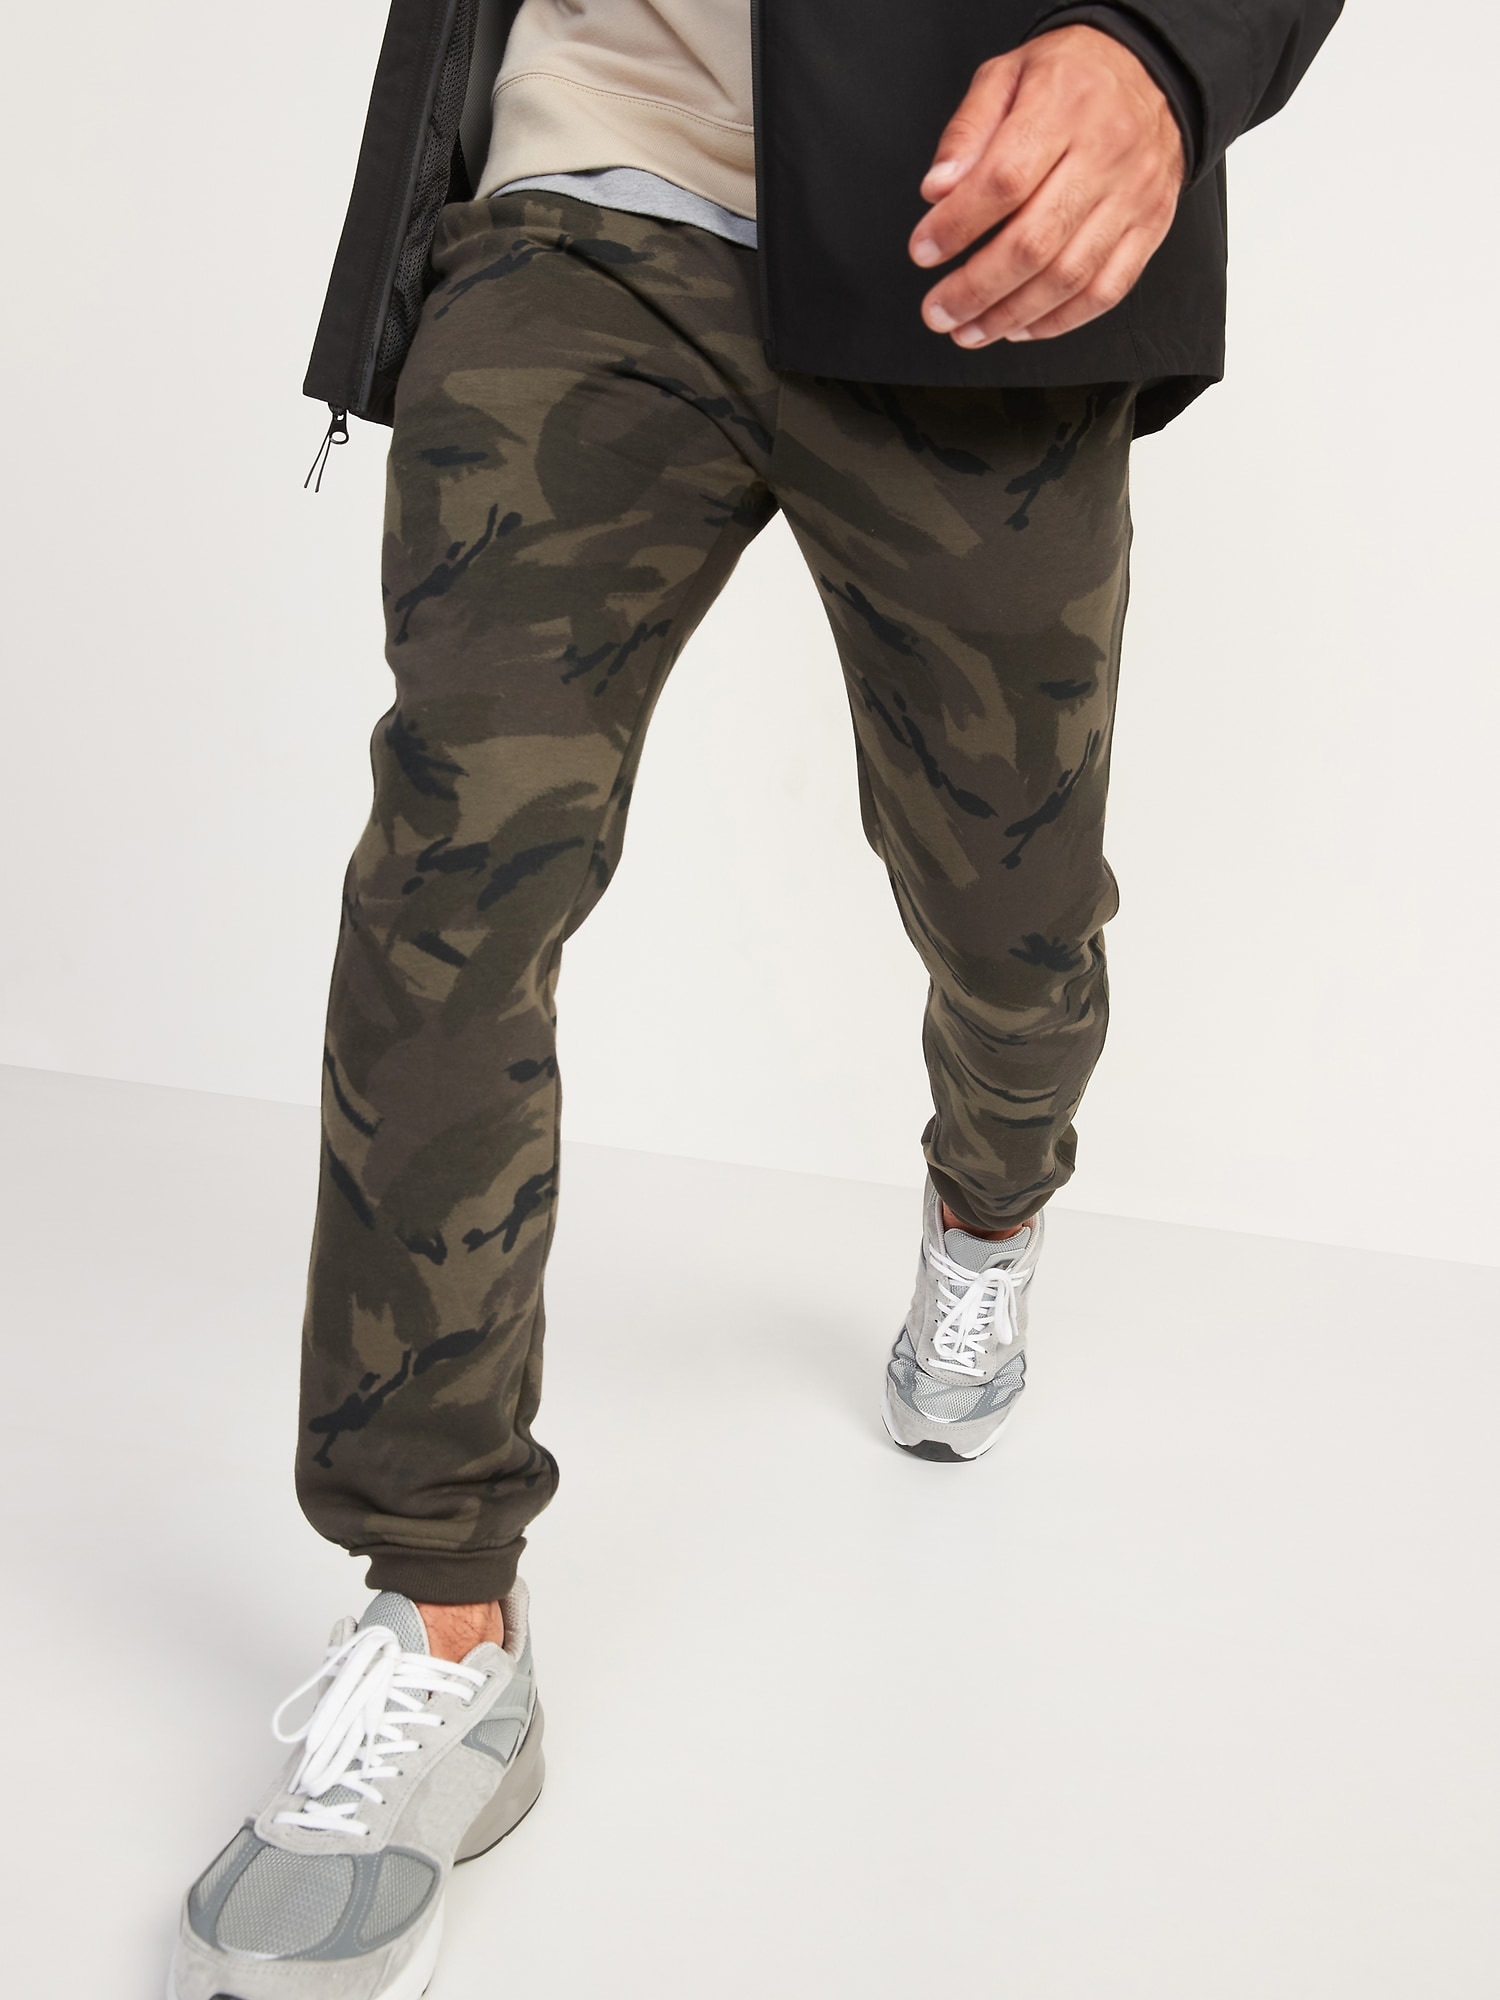 Mens Joggers Camouflage Sweatpants Casual Sports Camo Pants Full